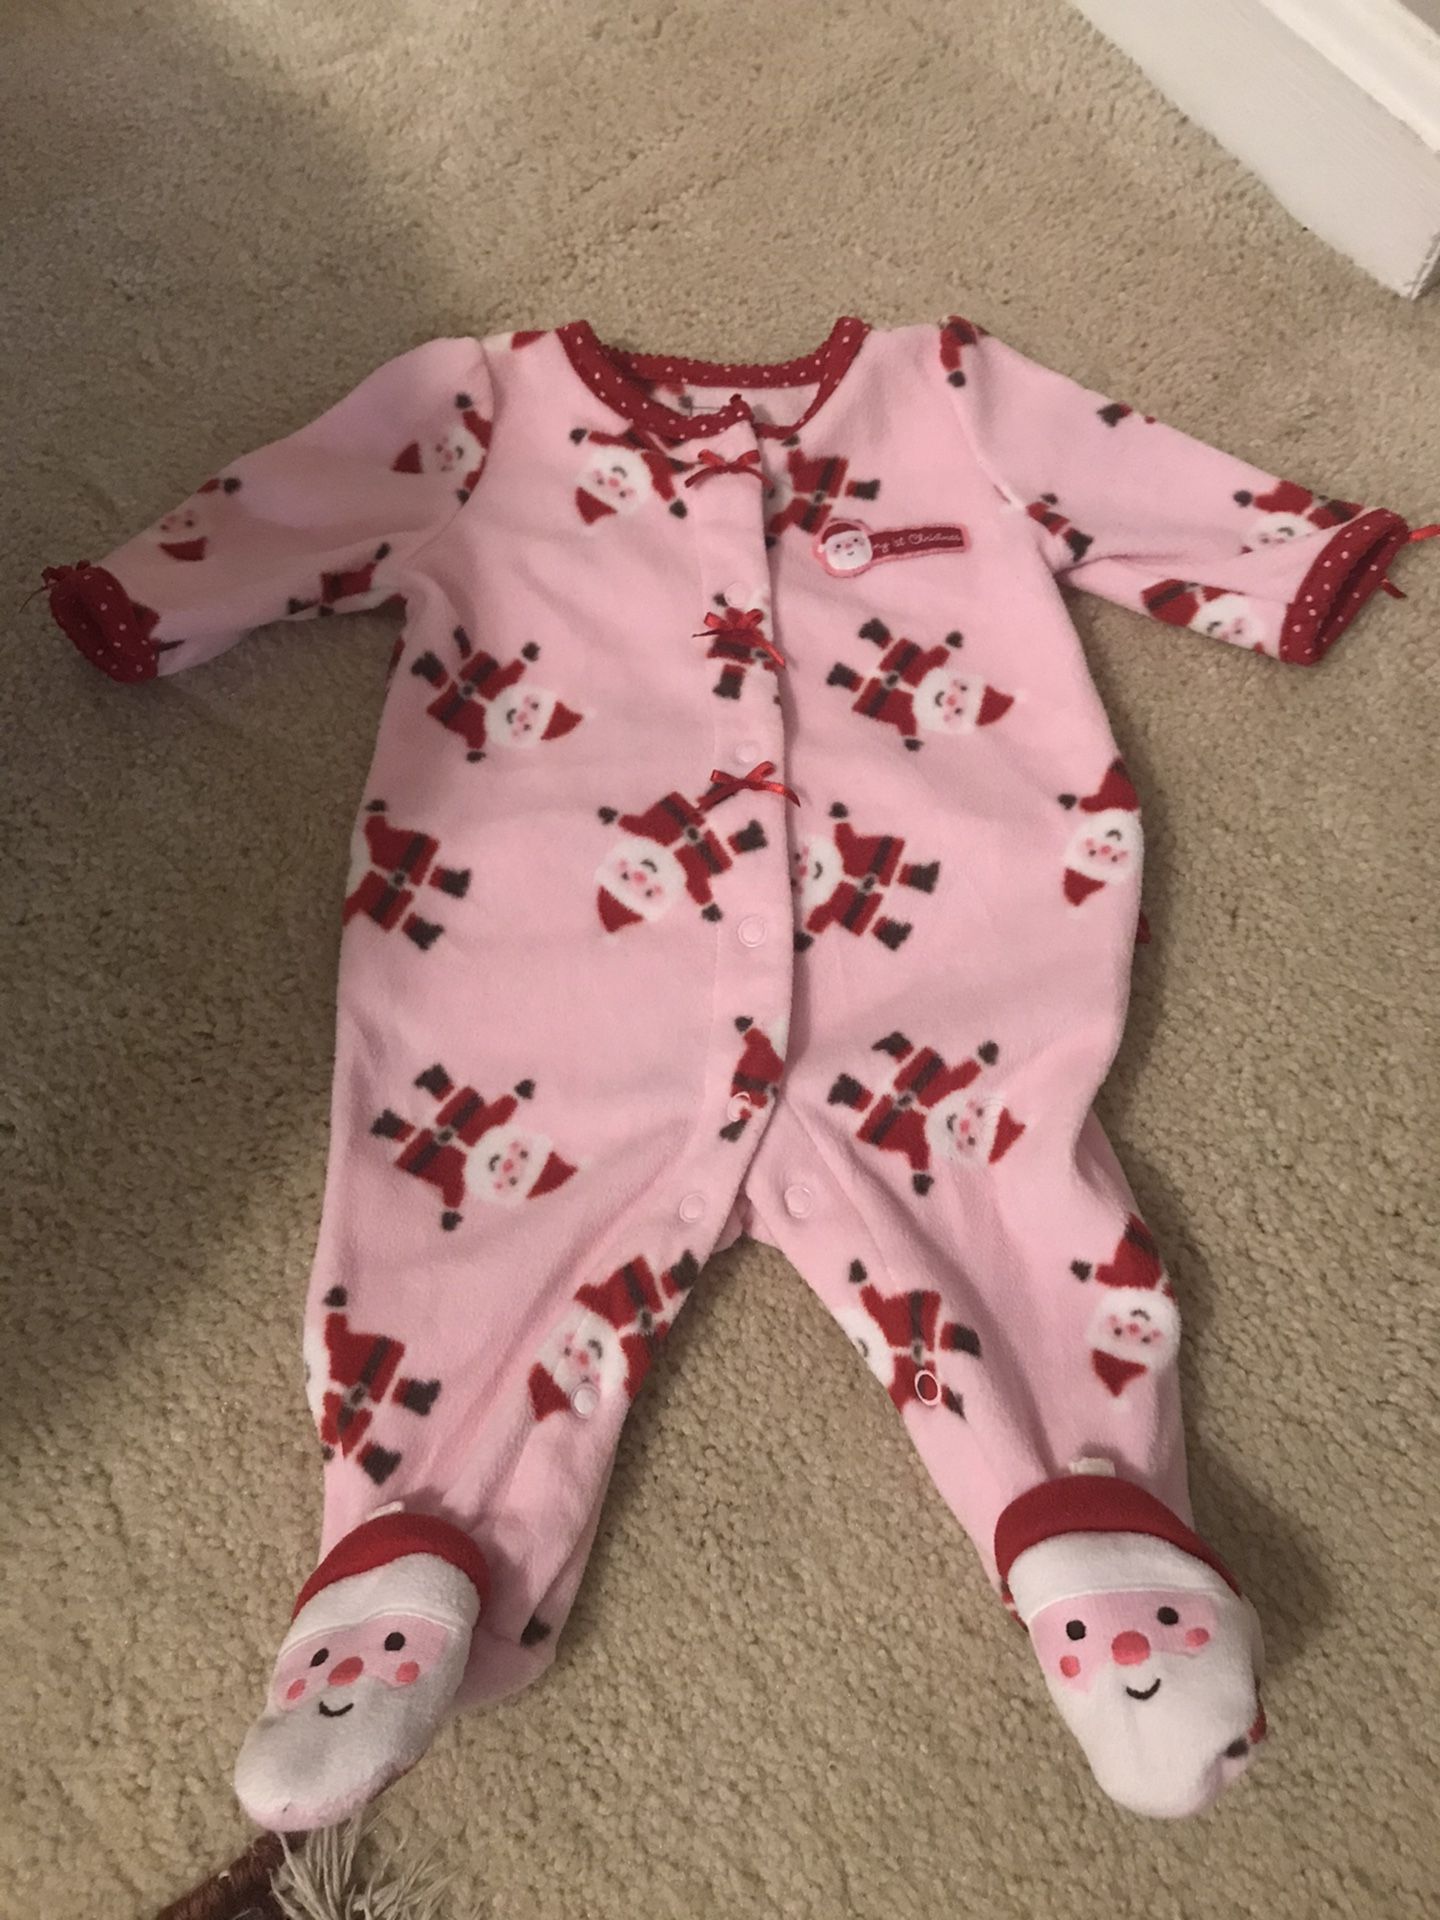 Santa clause baby clothes size NB